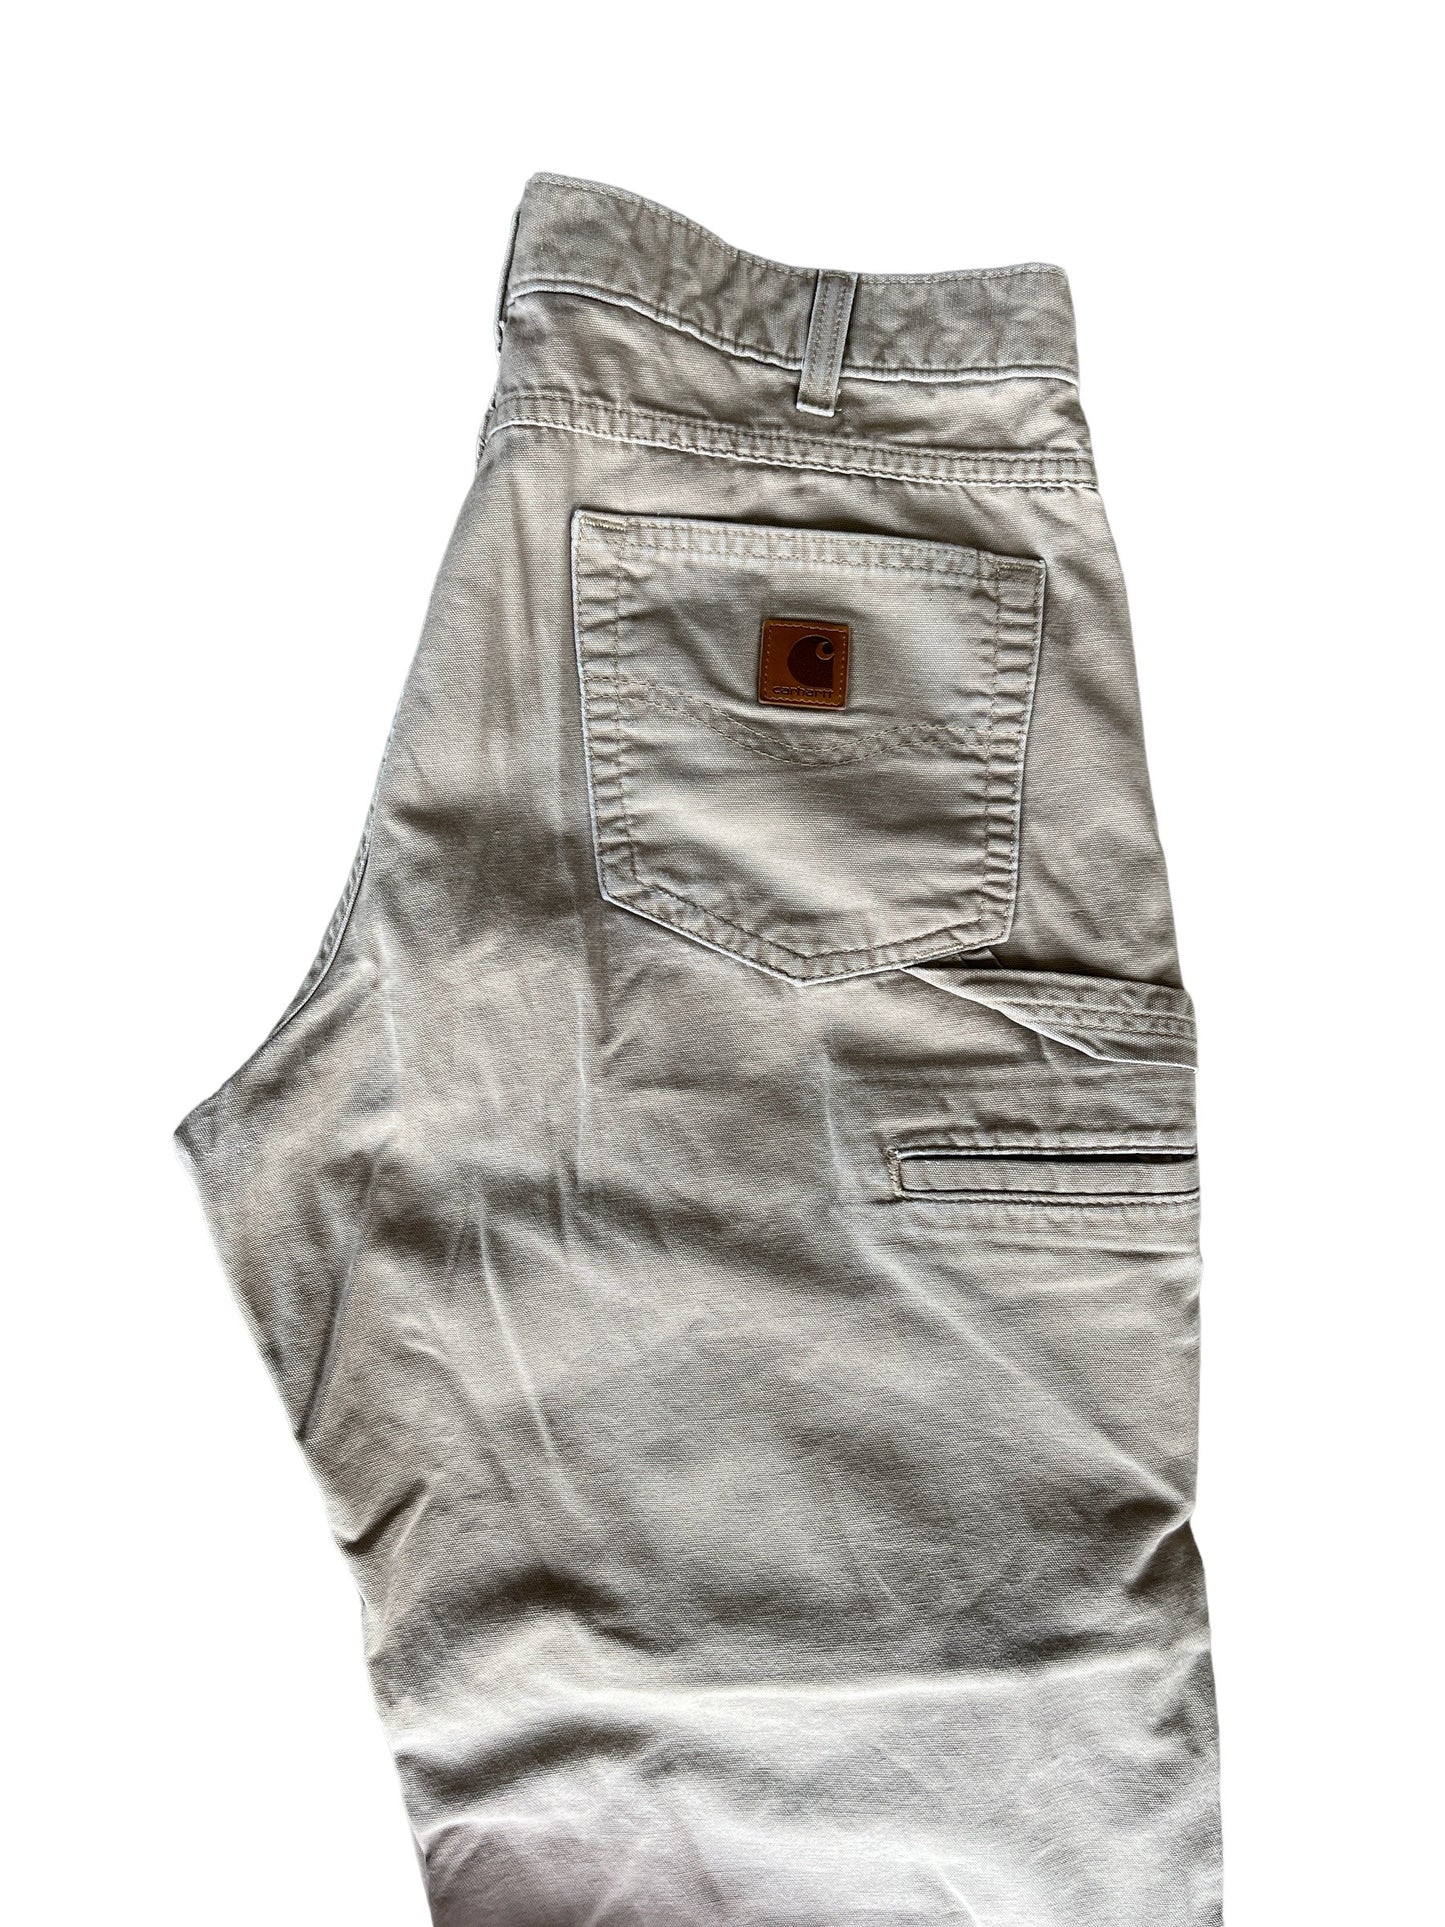 Vintage Carhartt Relaxed Pants - Tan